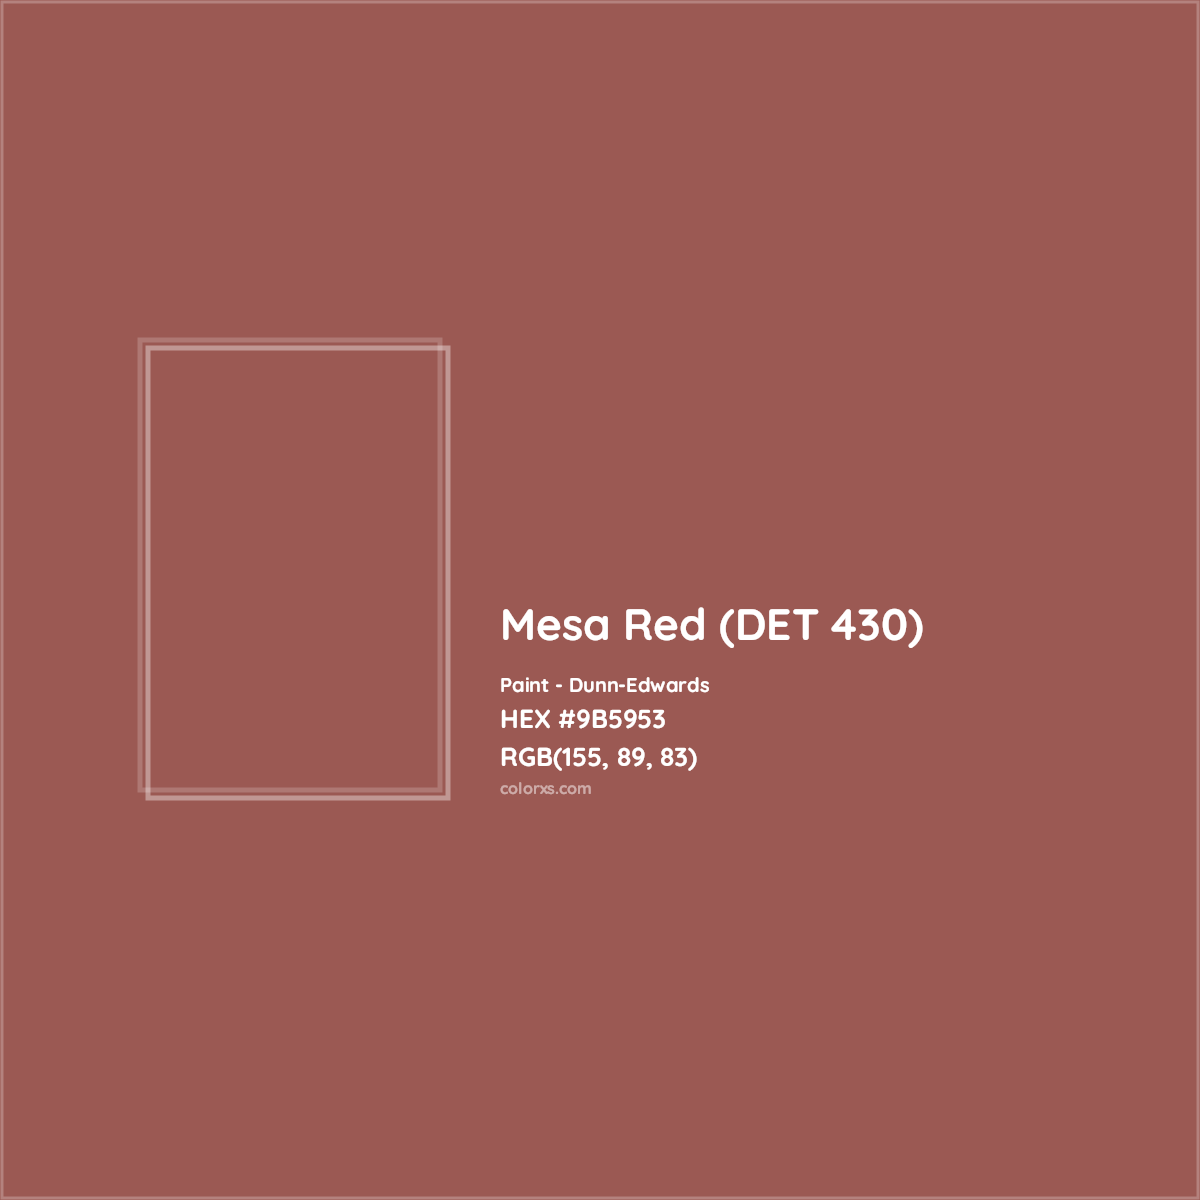 HEX #9B5953 Mesa Red (DET 430) Paint Dunn-Edwards - Color Code